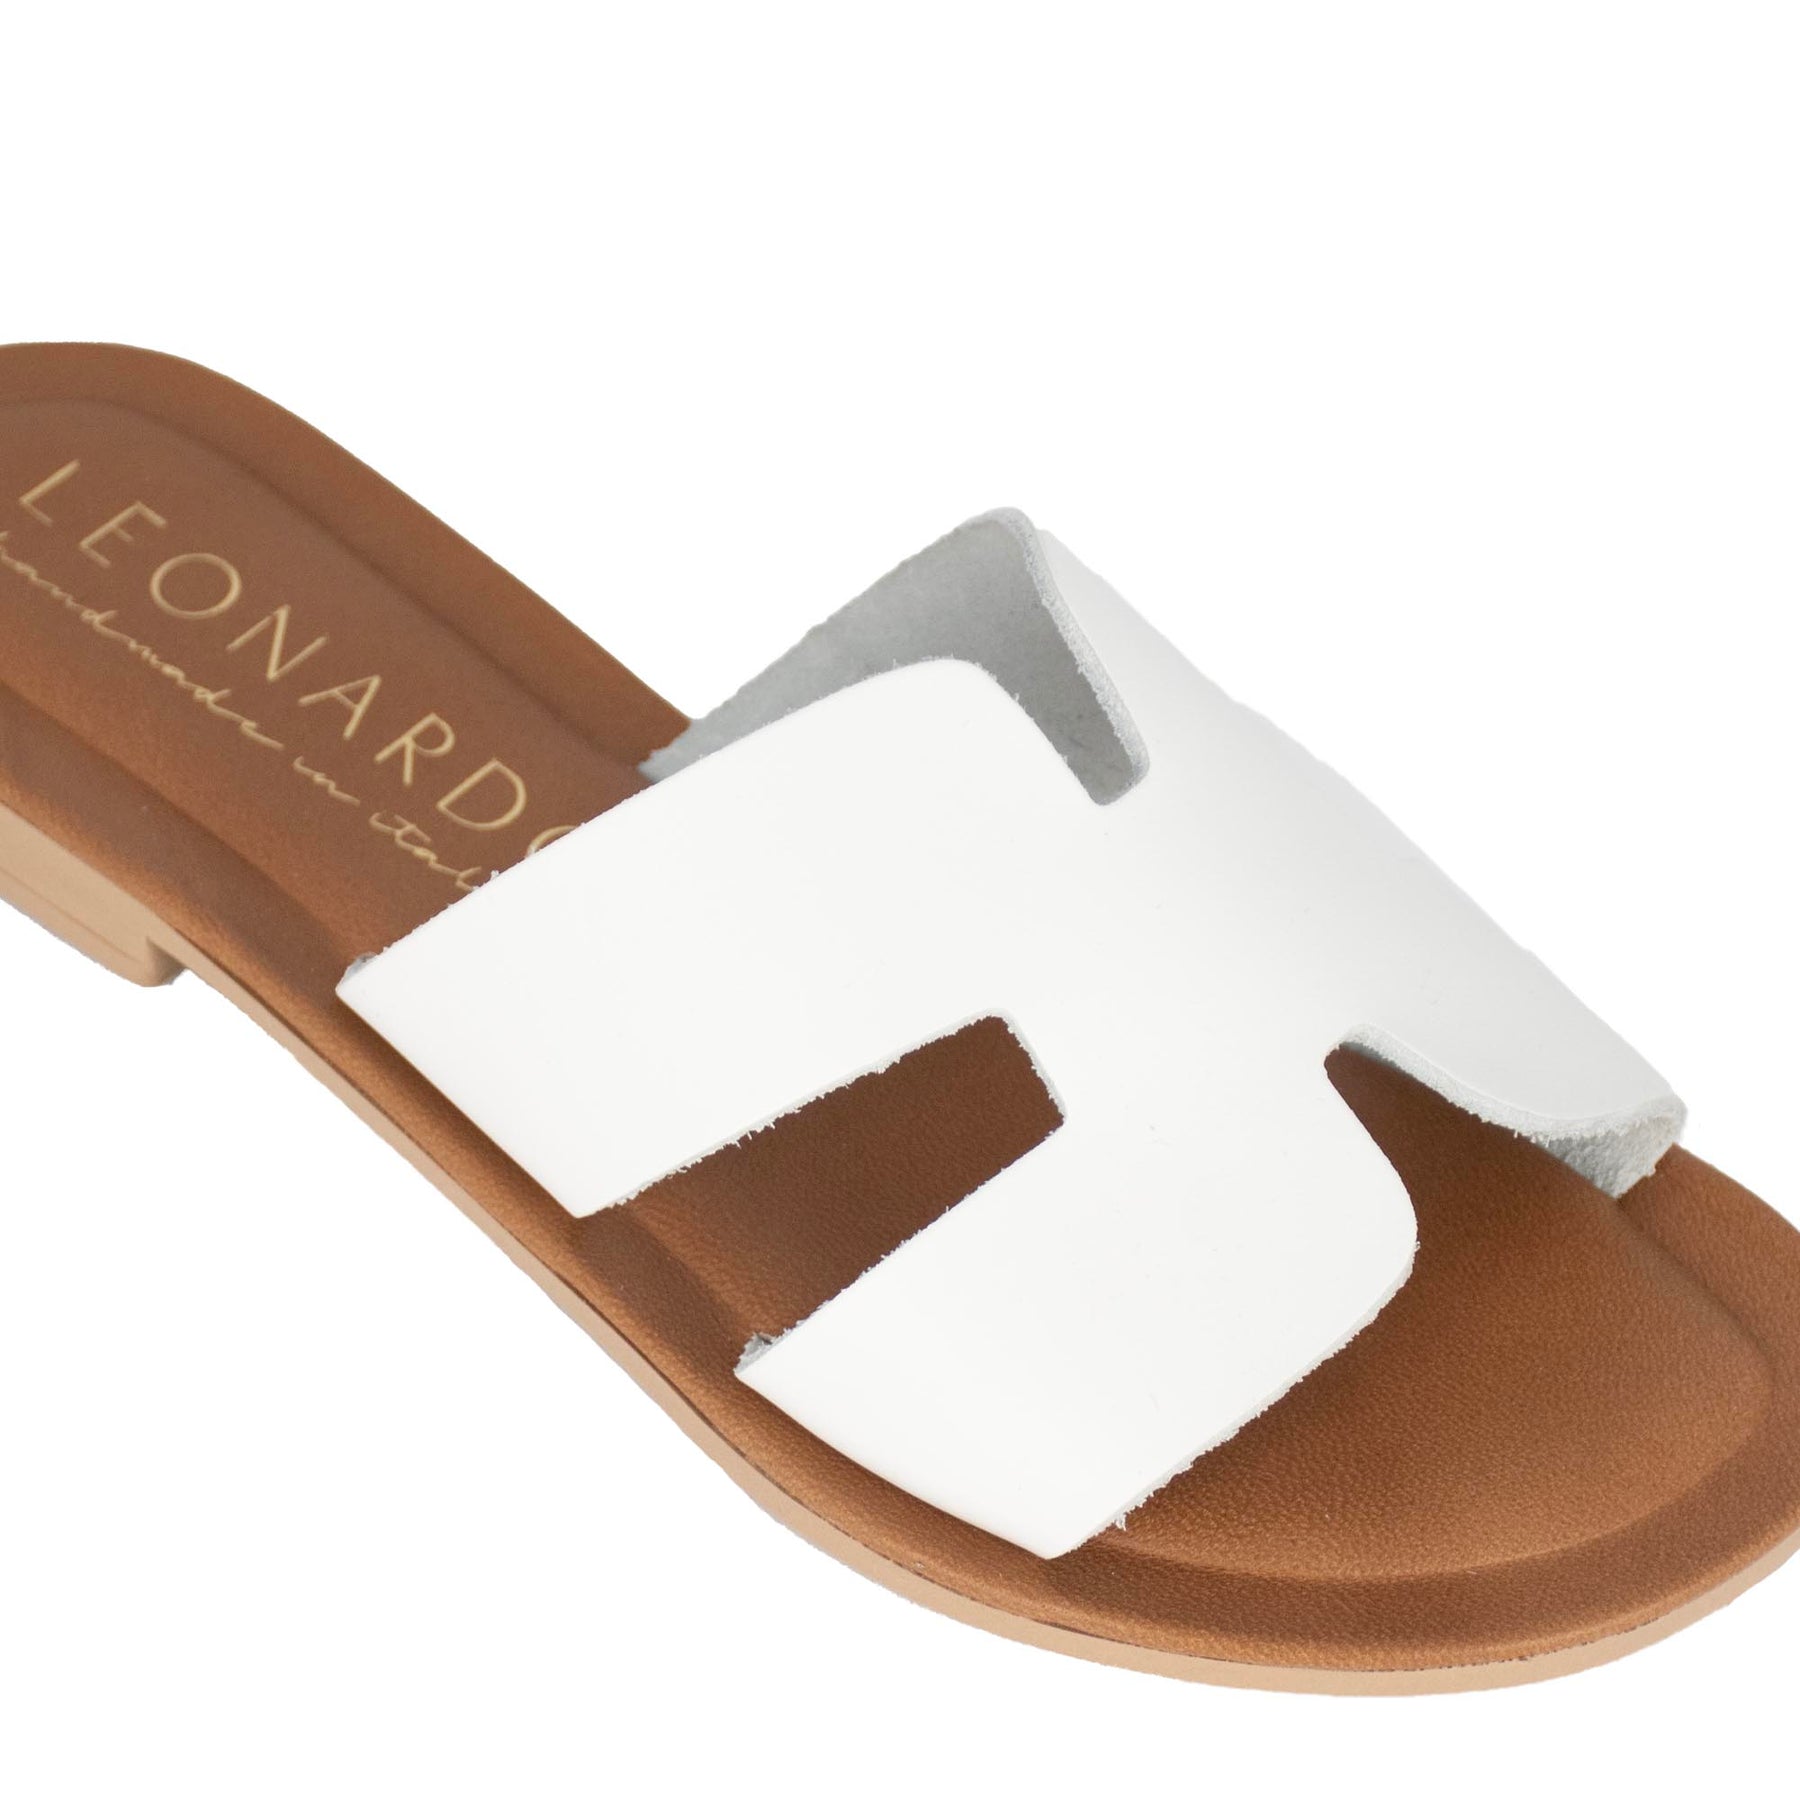 White and brown leather women's slippers